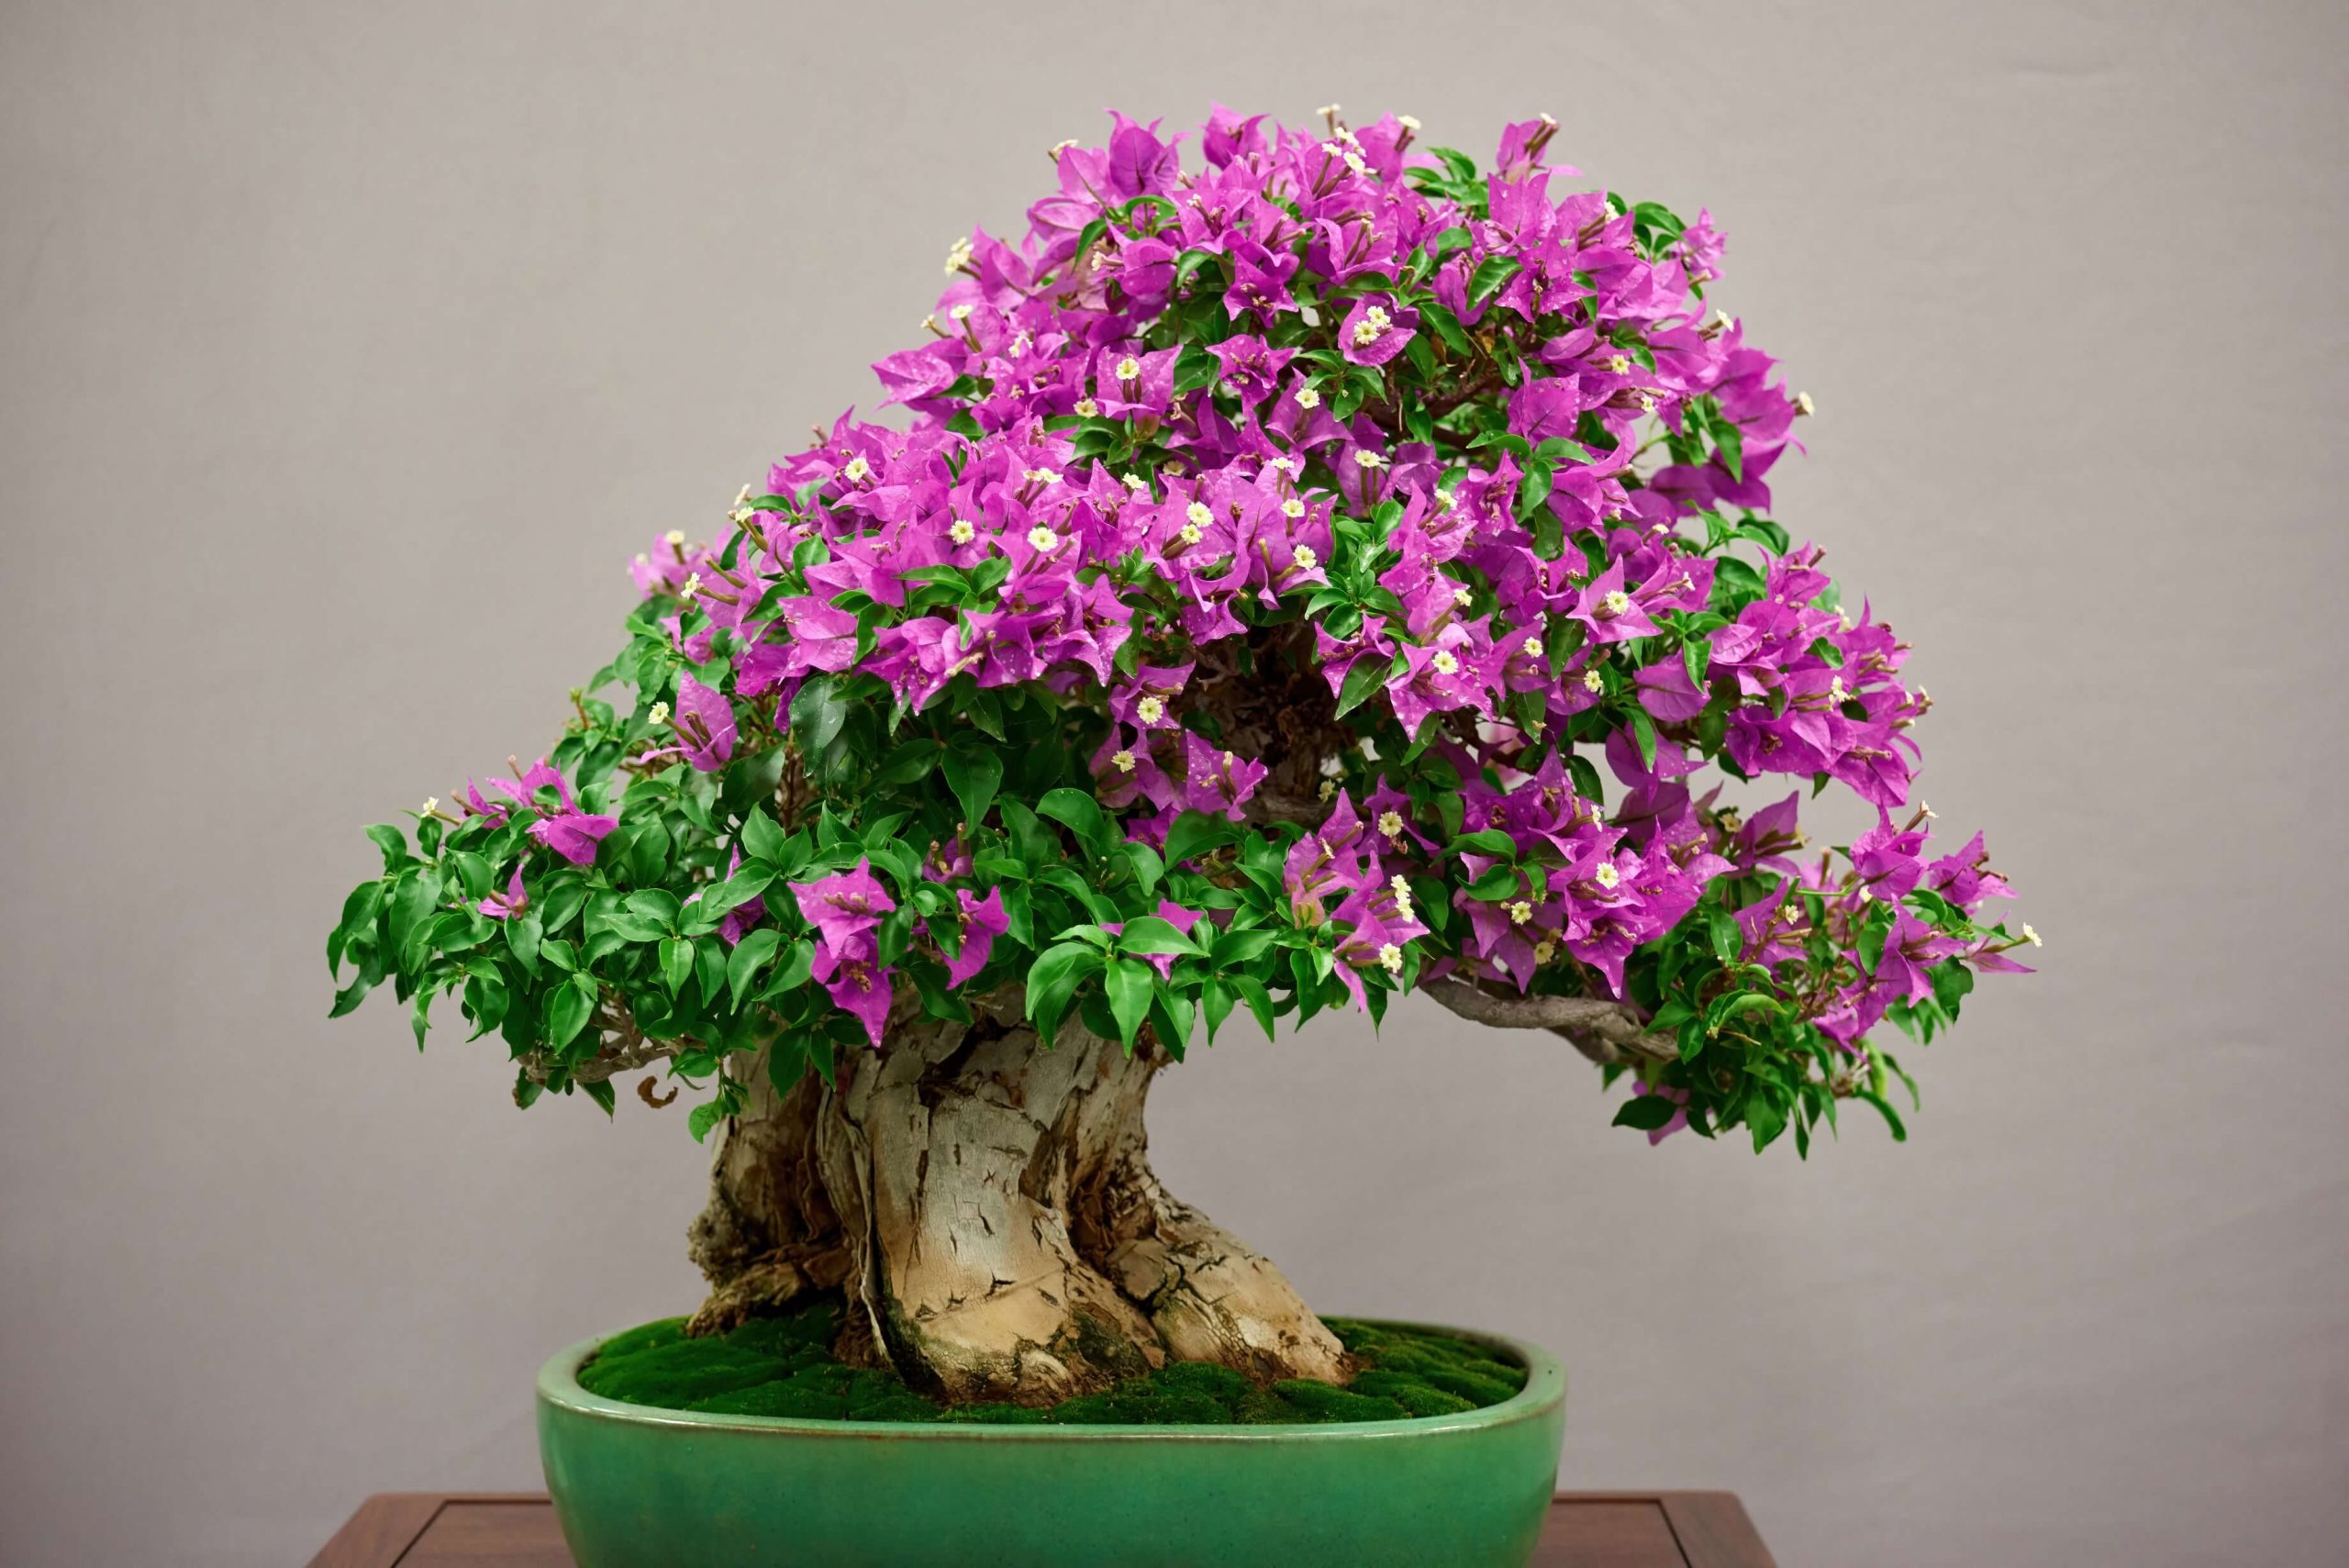 a photo of a bonsai tree with pink flowers